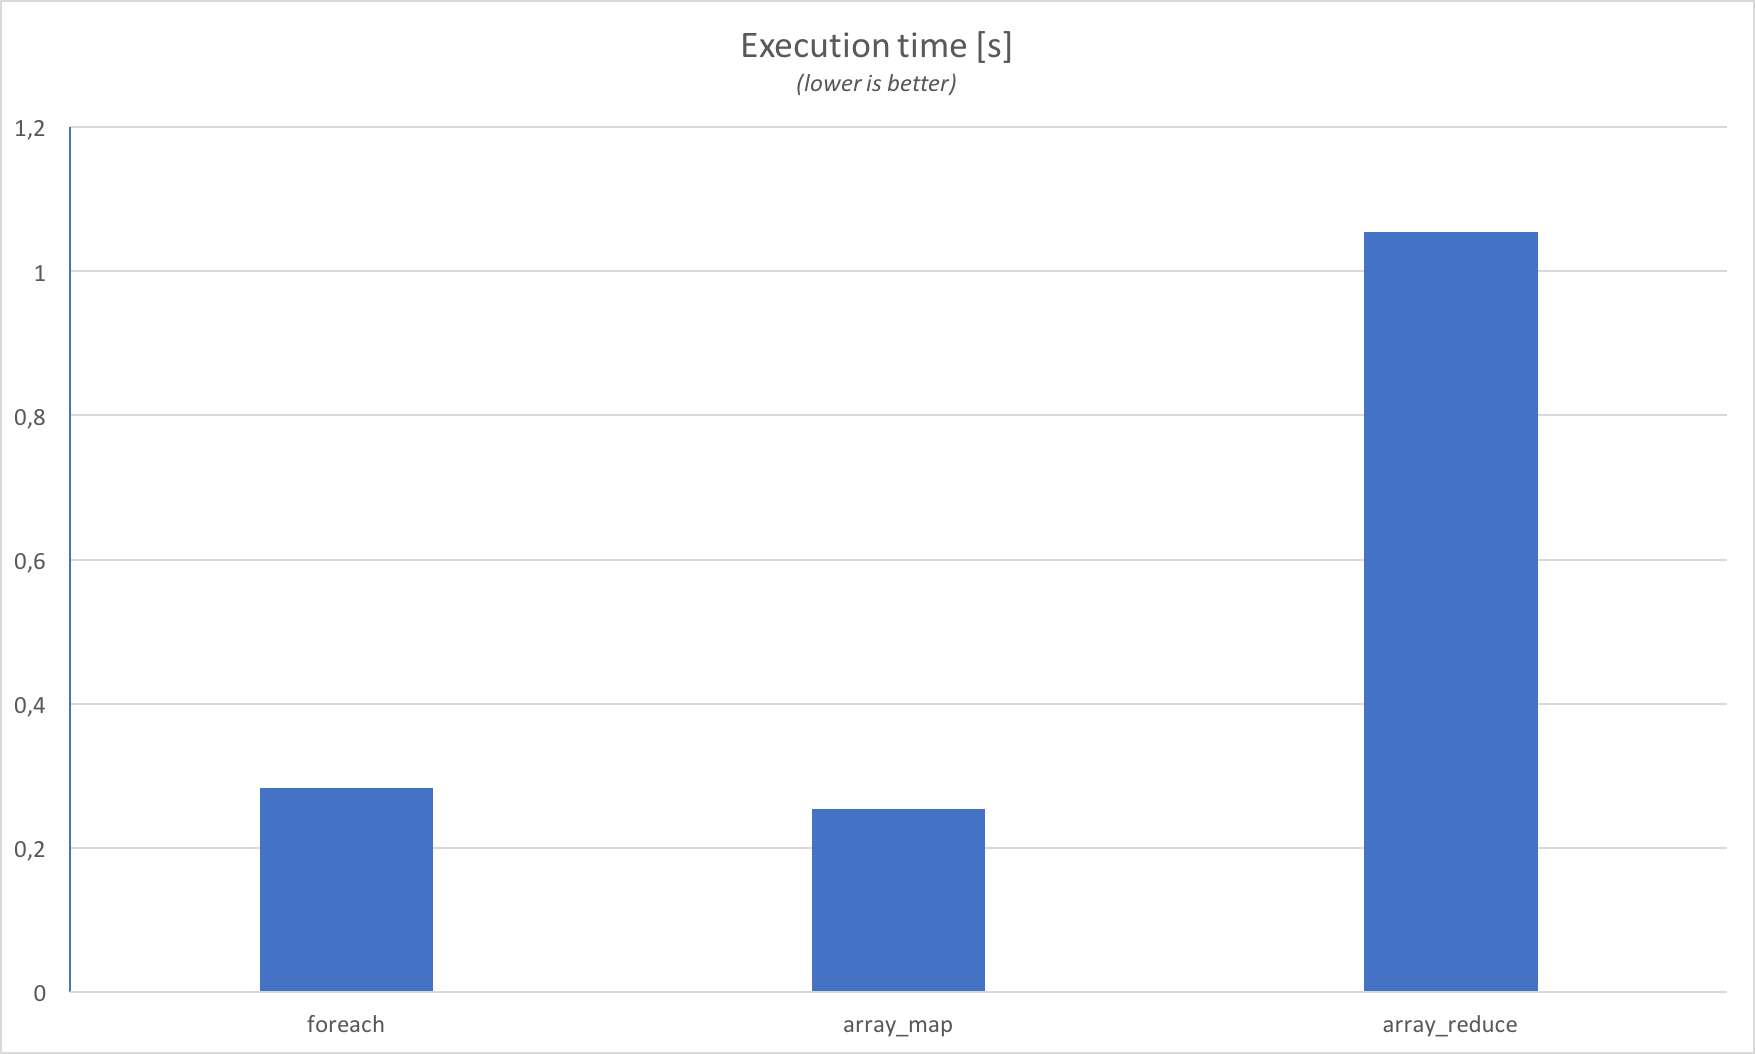 chart preseting results of tests